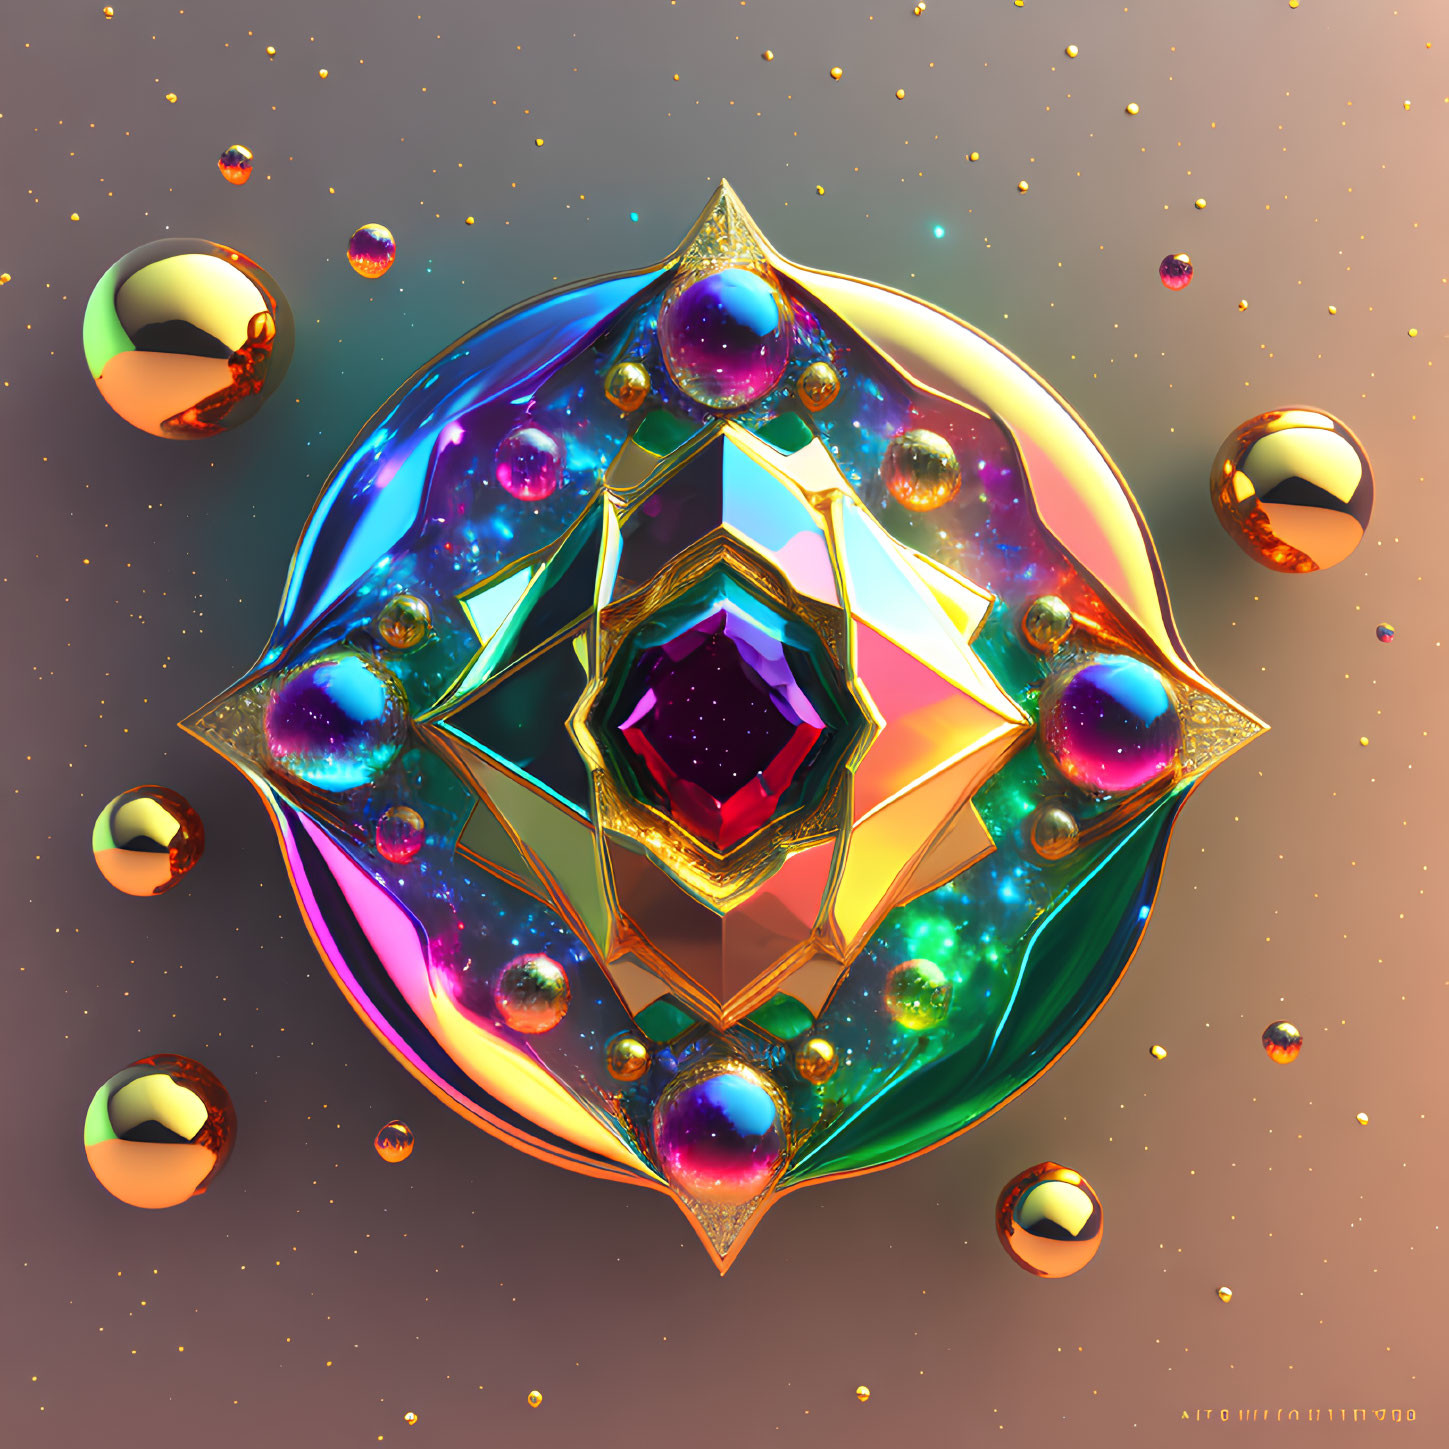 Colorful Crystal Surrounded by Reflective Orbs in Space